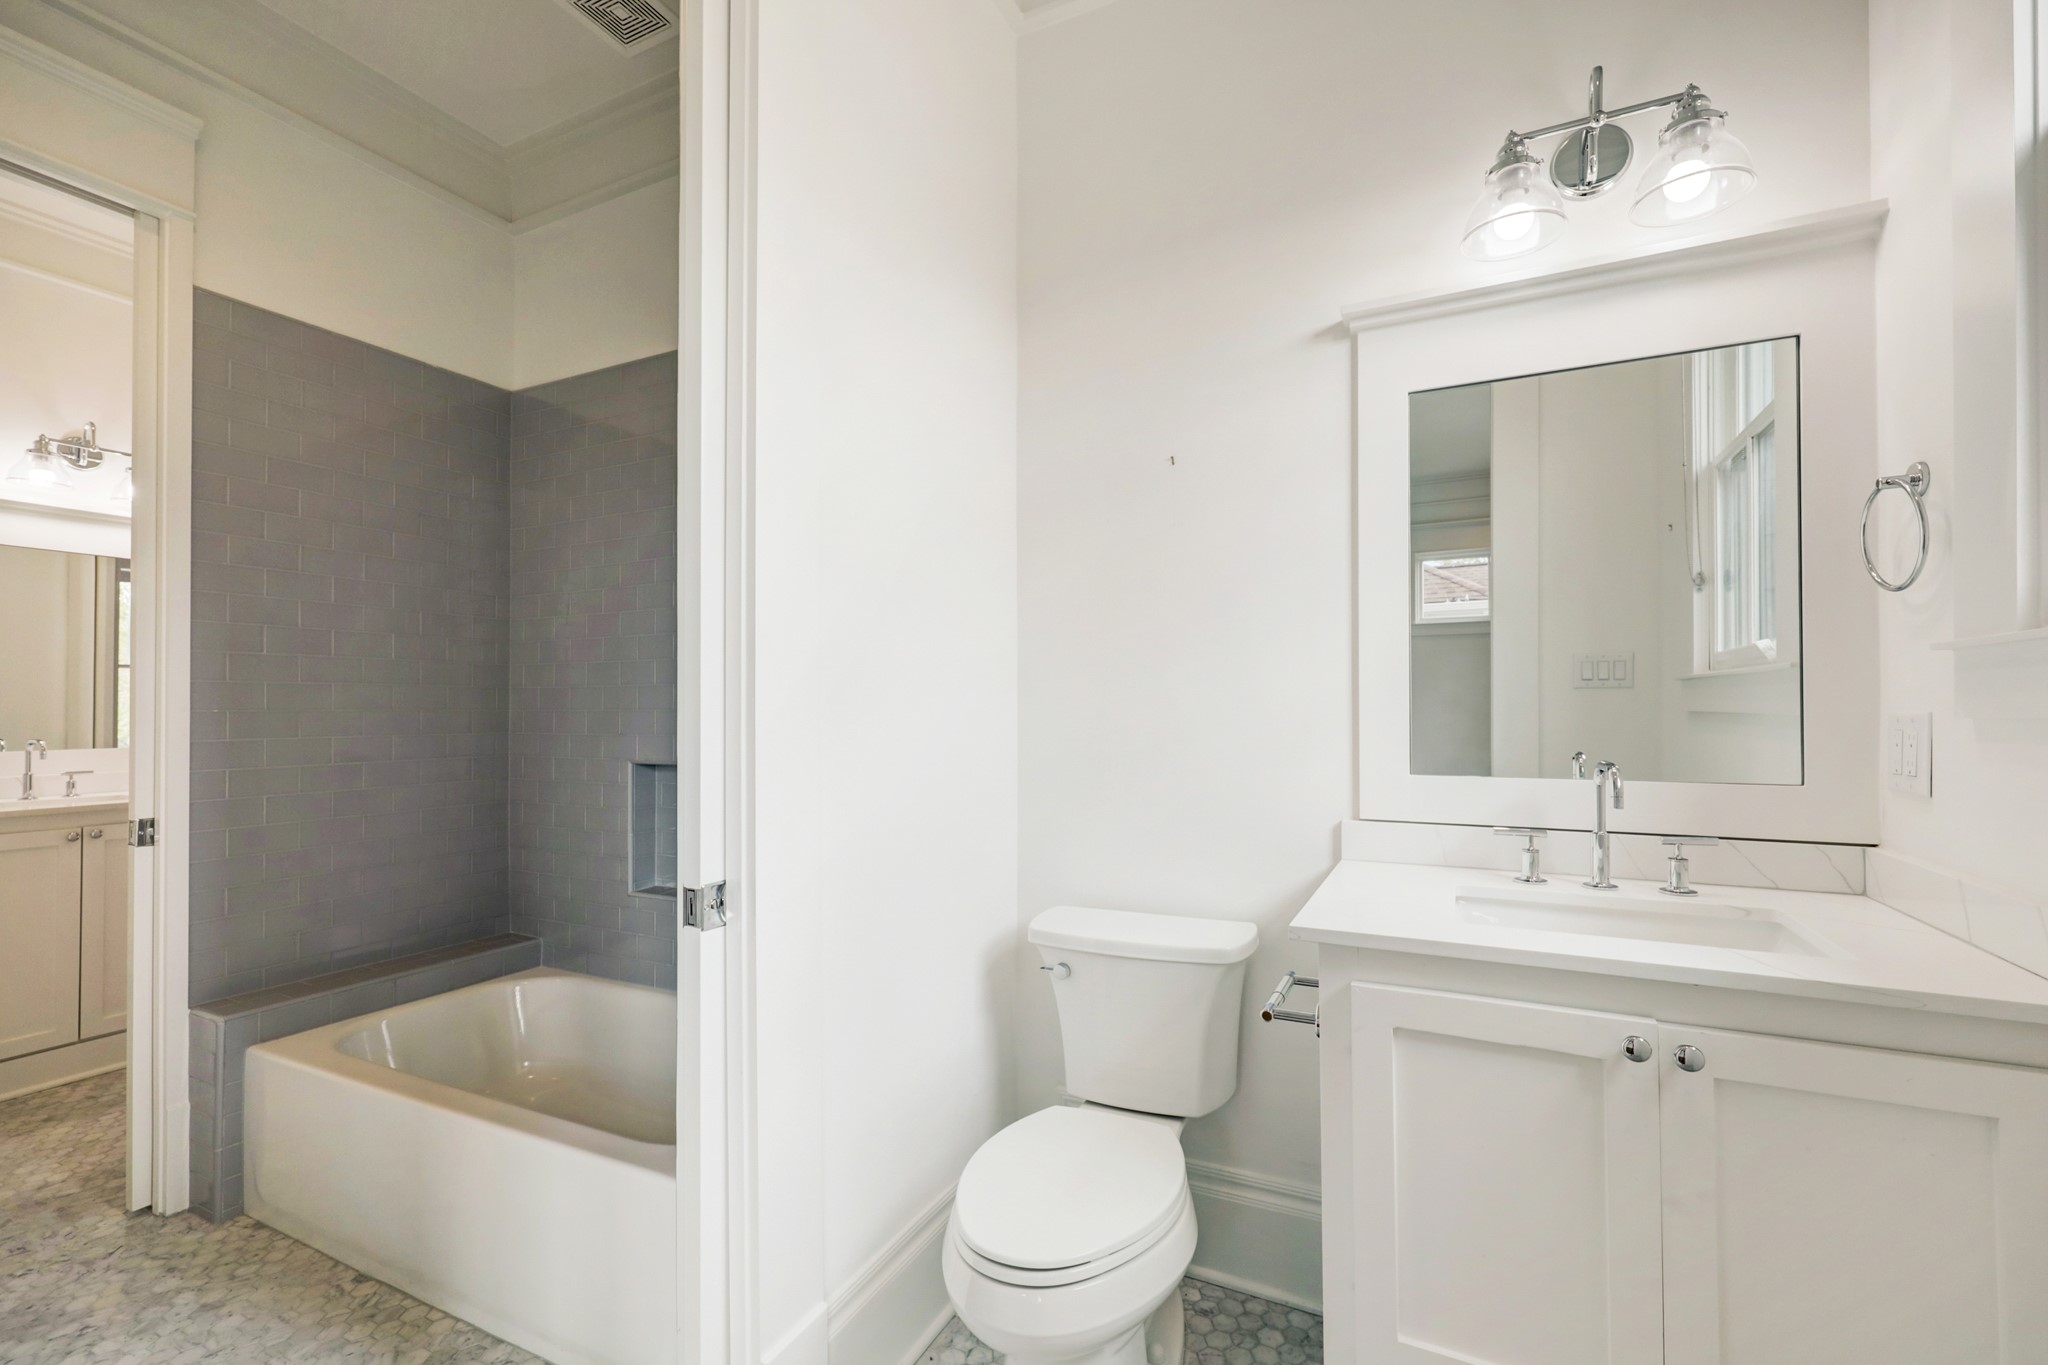 The Jack-and-Jill bathroom includes separate vanity and commode areas for each bedroom, with pocket doors that open to a large tub/shower. Tile flooring, quartz counter and polished nickel fixtures run throughout.